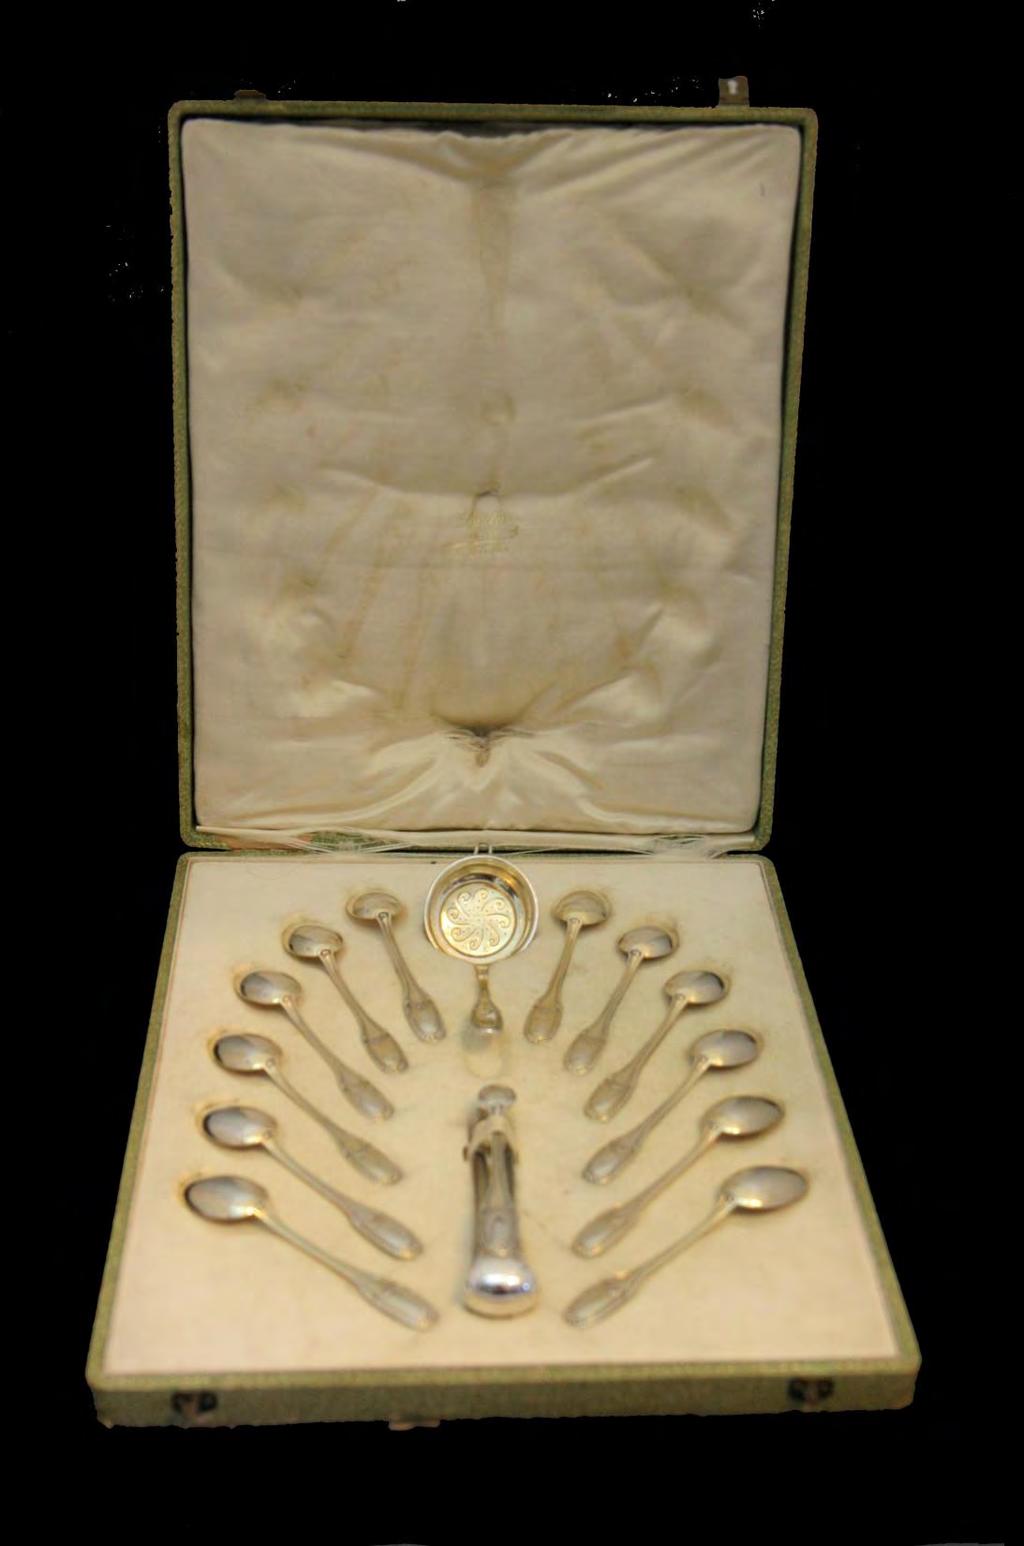 A Stunning 19th Century Louis XVI Tea Serving Set with 12 Sterling Silver Teaspoons (Gold Plated Bowls) a Pair of Gorgeous Sugar Tongs and a